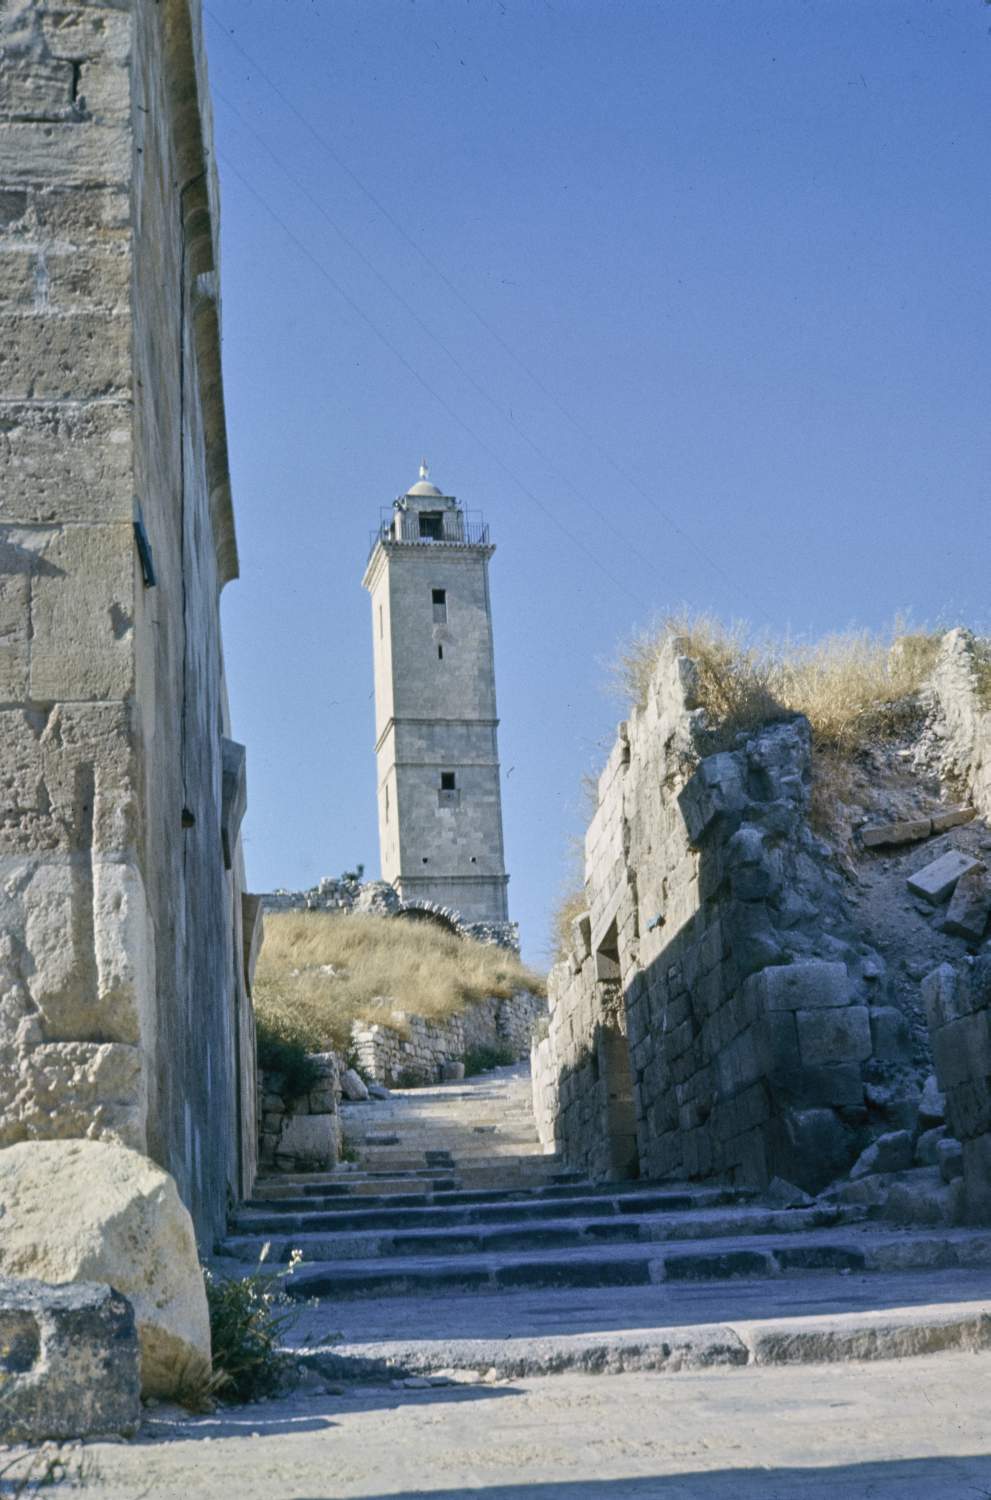 View of minaret from south, at bottom of path leading to mosque.